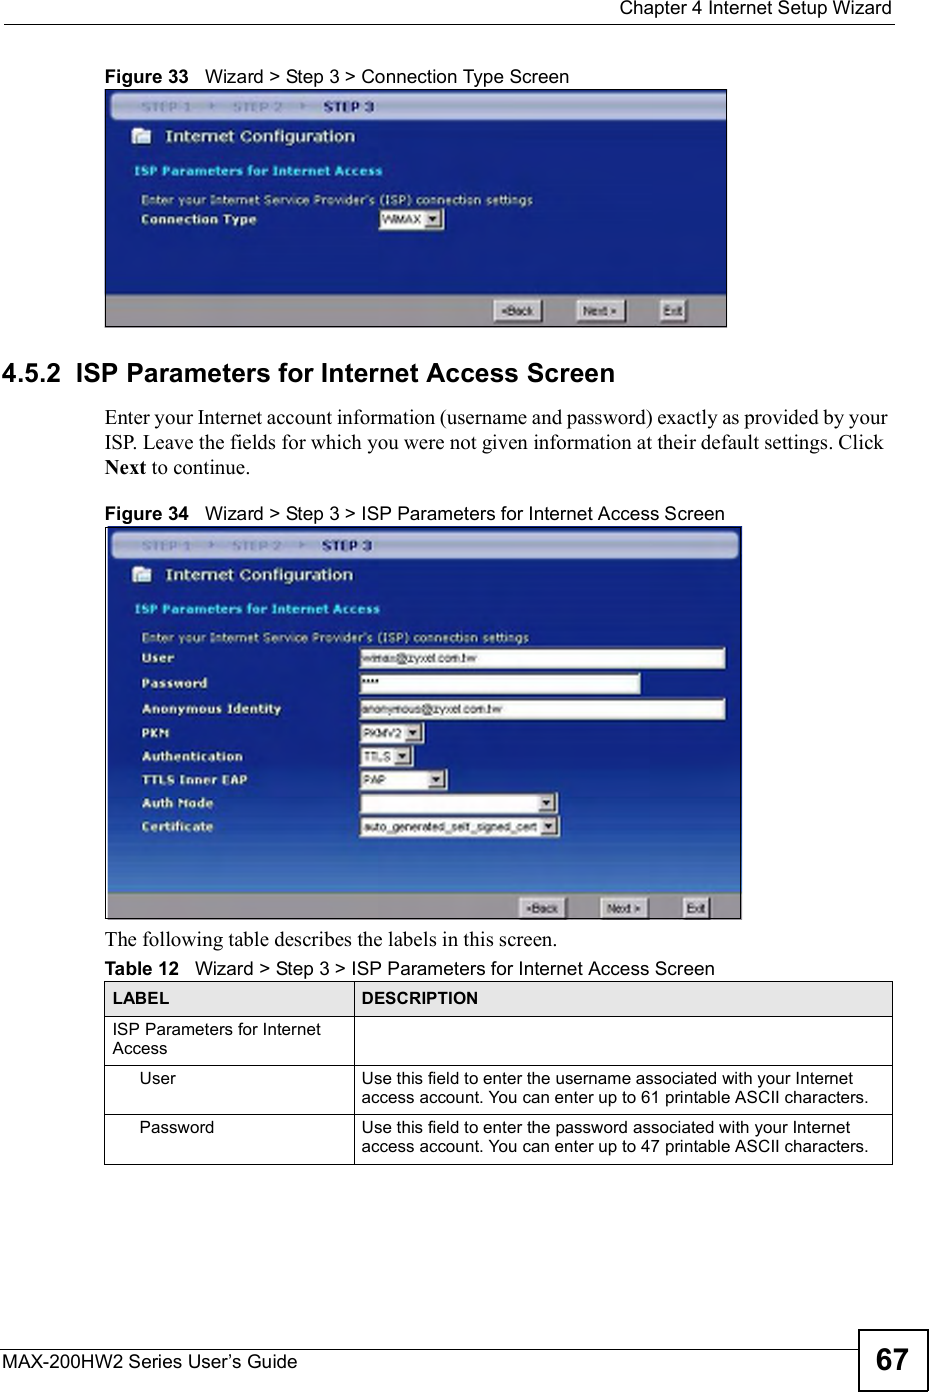  Chapter 4Internet Setup WizardMAX-200HW2 Series User s Guide 67Figure 33   Wizard &gt; Step 3 &gt; Connection Type Screen4.5.2  ISP Parameters for Internet Access ScreenEnter your Internet account information (username and password) exactly as provided by your ISP. Leave the fields for which you were not given information at their default settings. Click Next to continue.Figure 34   Wizard &gt; Step 3 &gt; ISP Parameters for Internet Access ScreenThe following table describes the labels in this screen.Table 12   Wizard &gt; Step 3 &gt; ISP Parameters for Internet Access ScreenLABEL DESCRIPTIONISP Parameters for Internet AccessUserUse this field to enter the username associated with your Internet access account. You can enter up to 61 printable ASCII characters.PasswordUse this field to enter the password associated with your Internet access account. You can enter up to 47 printable ASCII characters.